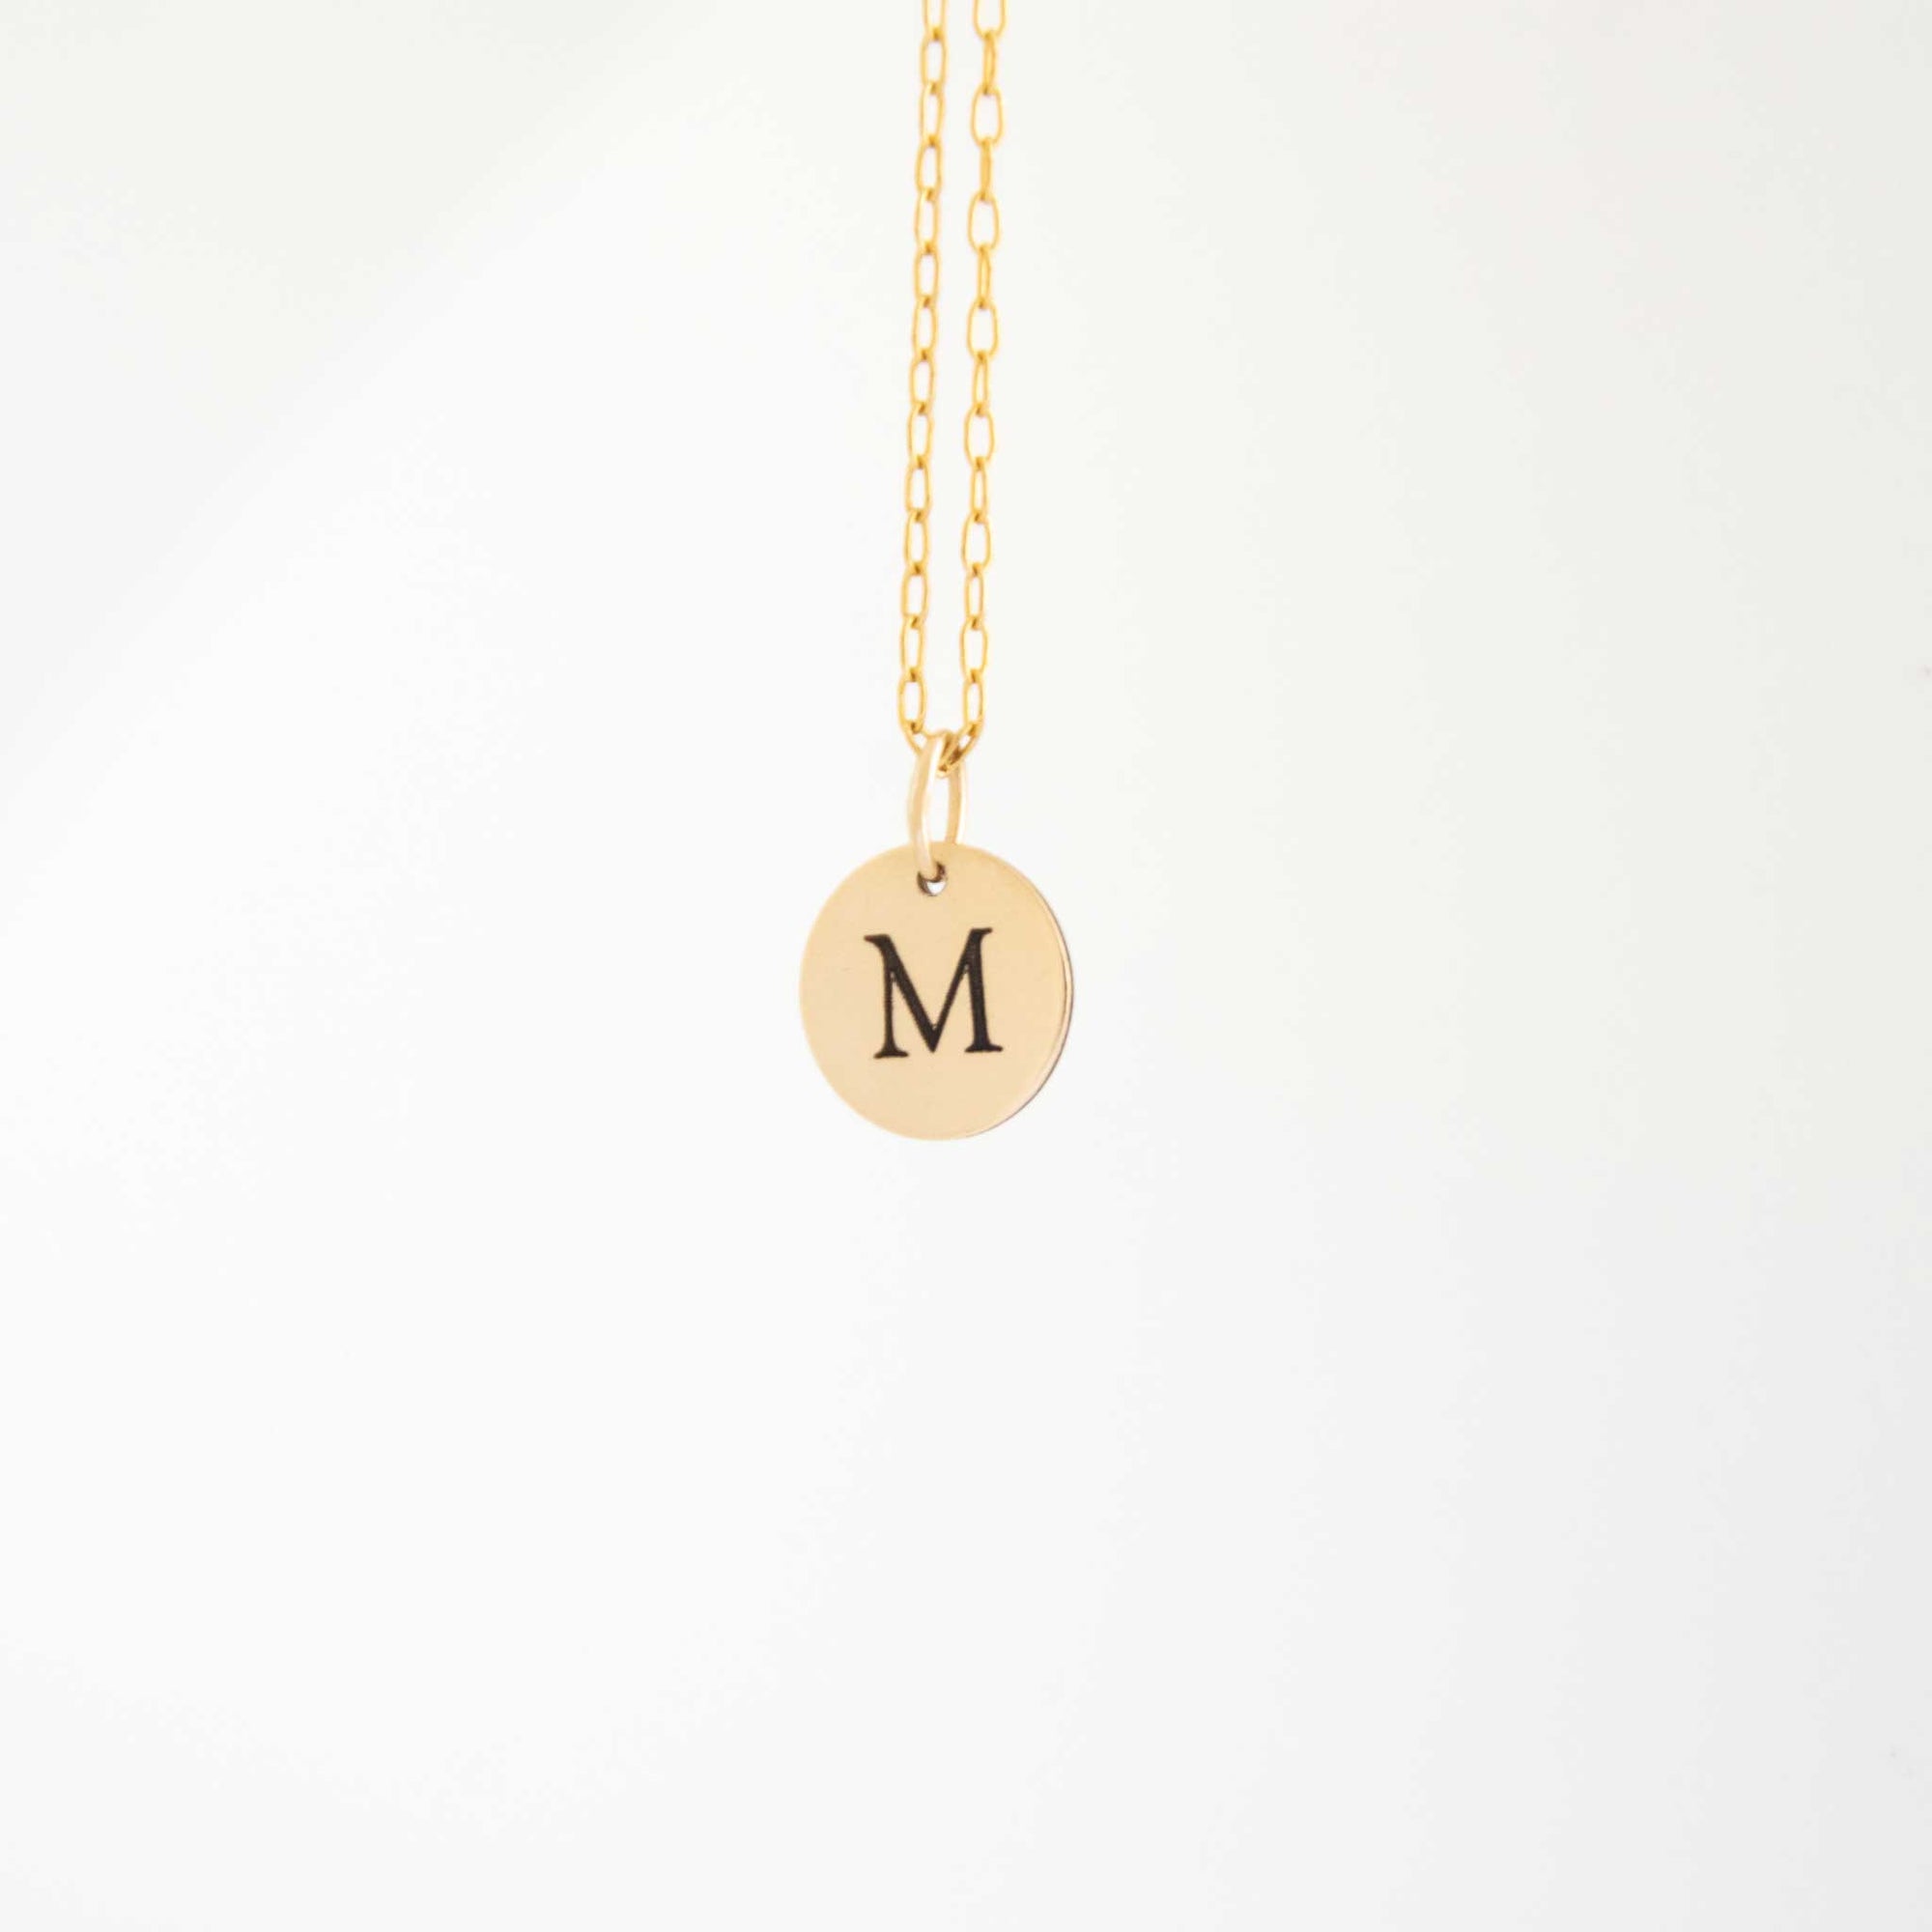 The 10mm circle necklace hanging with a solid white background behind.